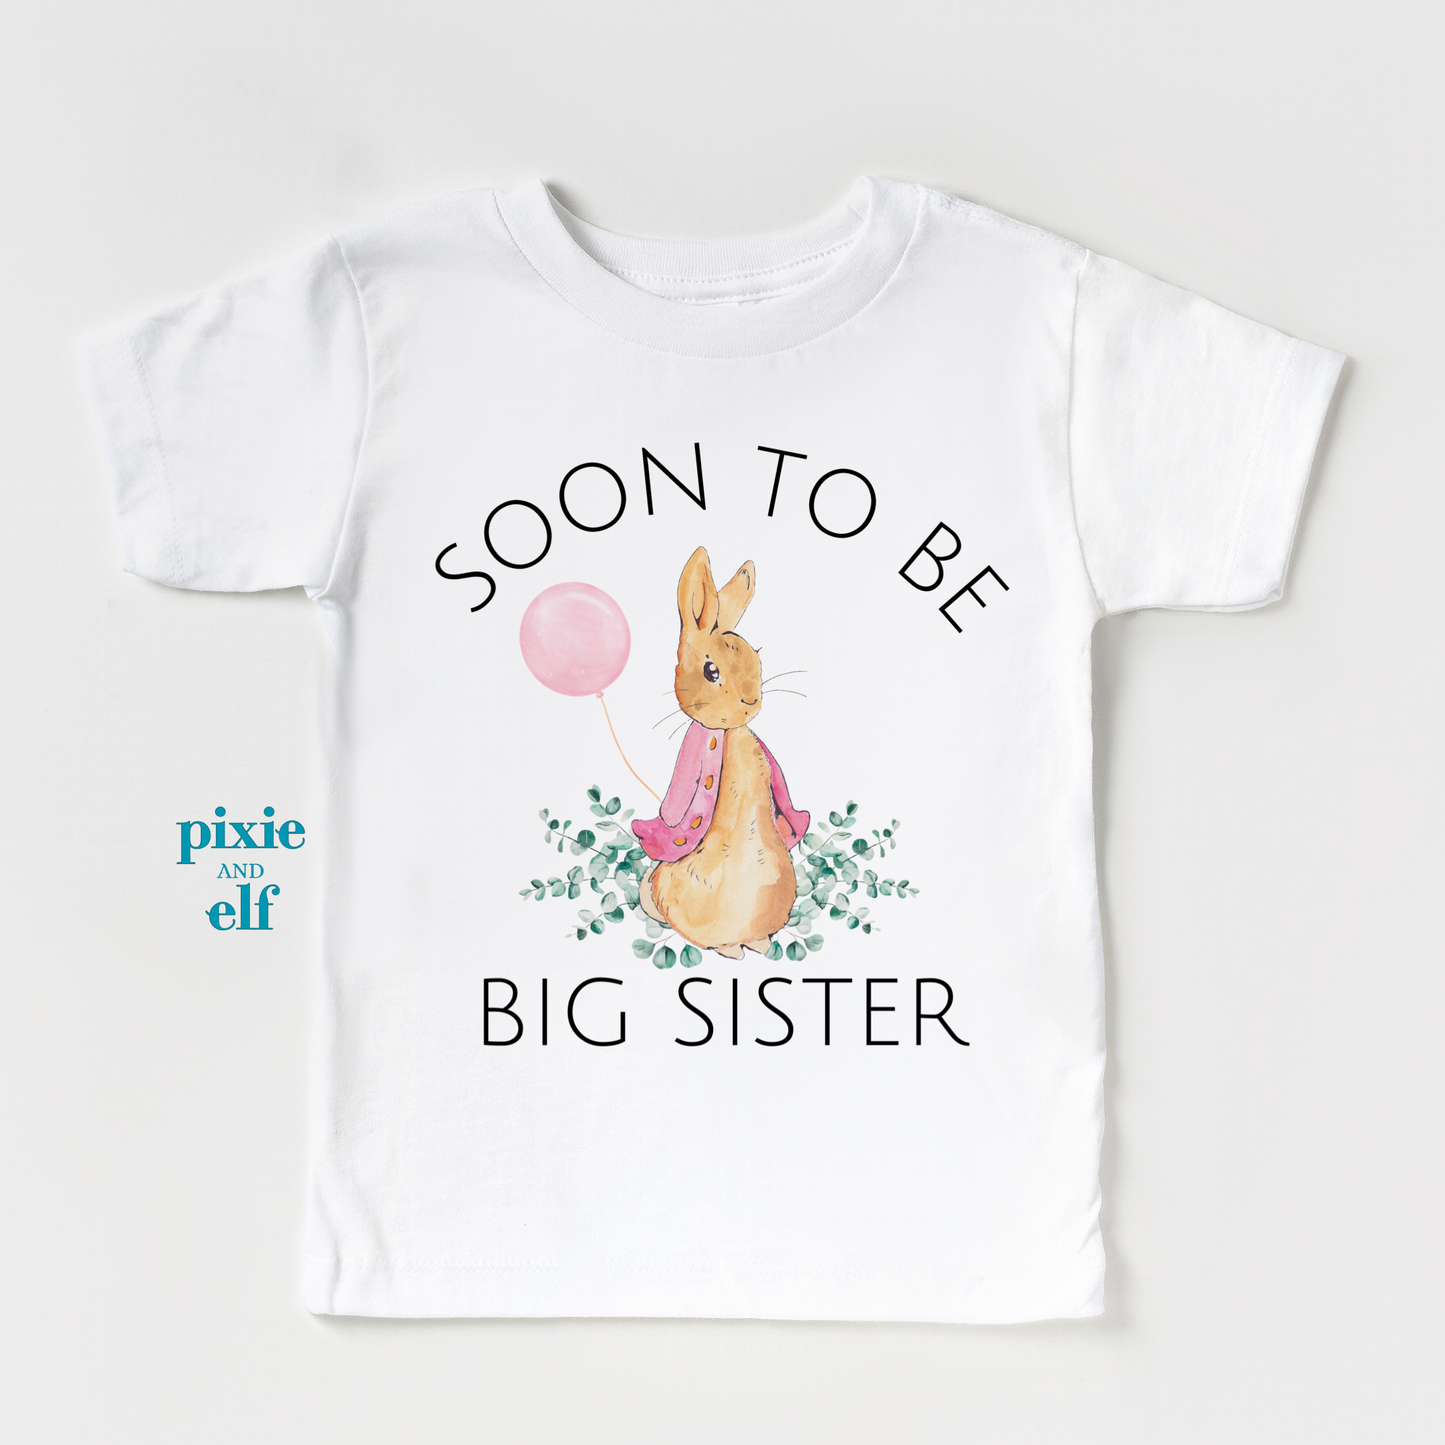 Pink Rabbit holding a pink balloon and a text soon to be big sister on a white t shirt